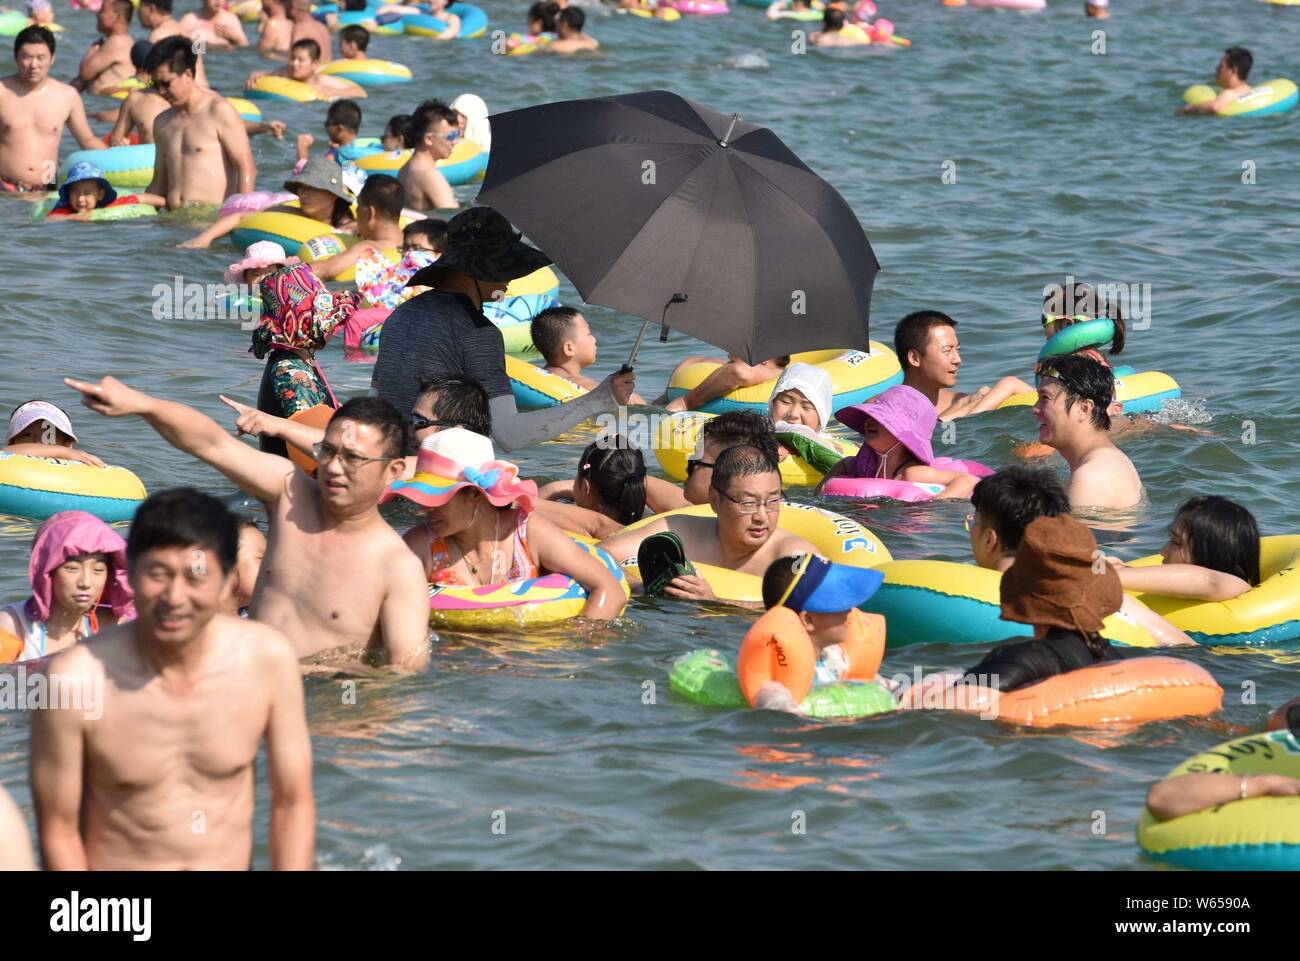 Holidaymakers crowd a beach resort to cool off on a scorching day after 'Liqiu,' meaning the start of autumn, one of the traditional 24 solar terms, i Stock Photo